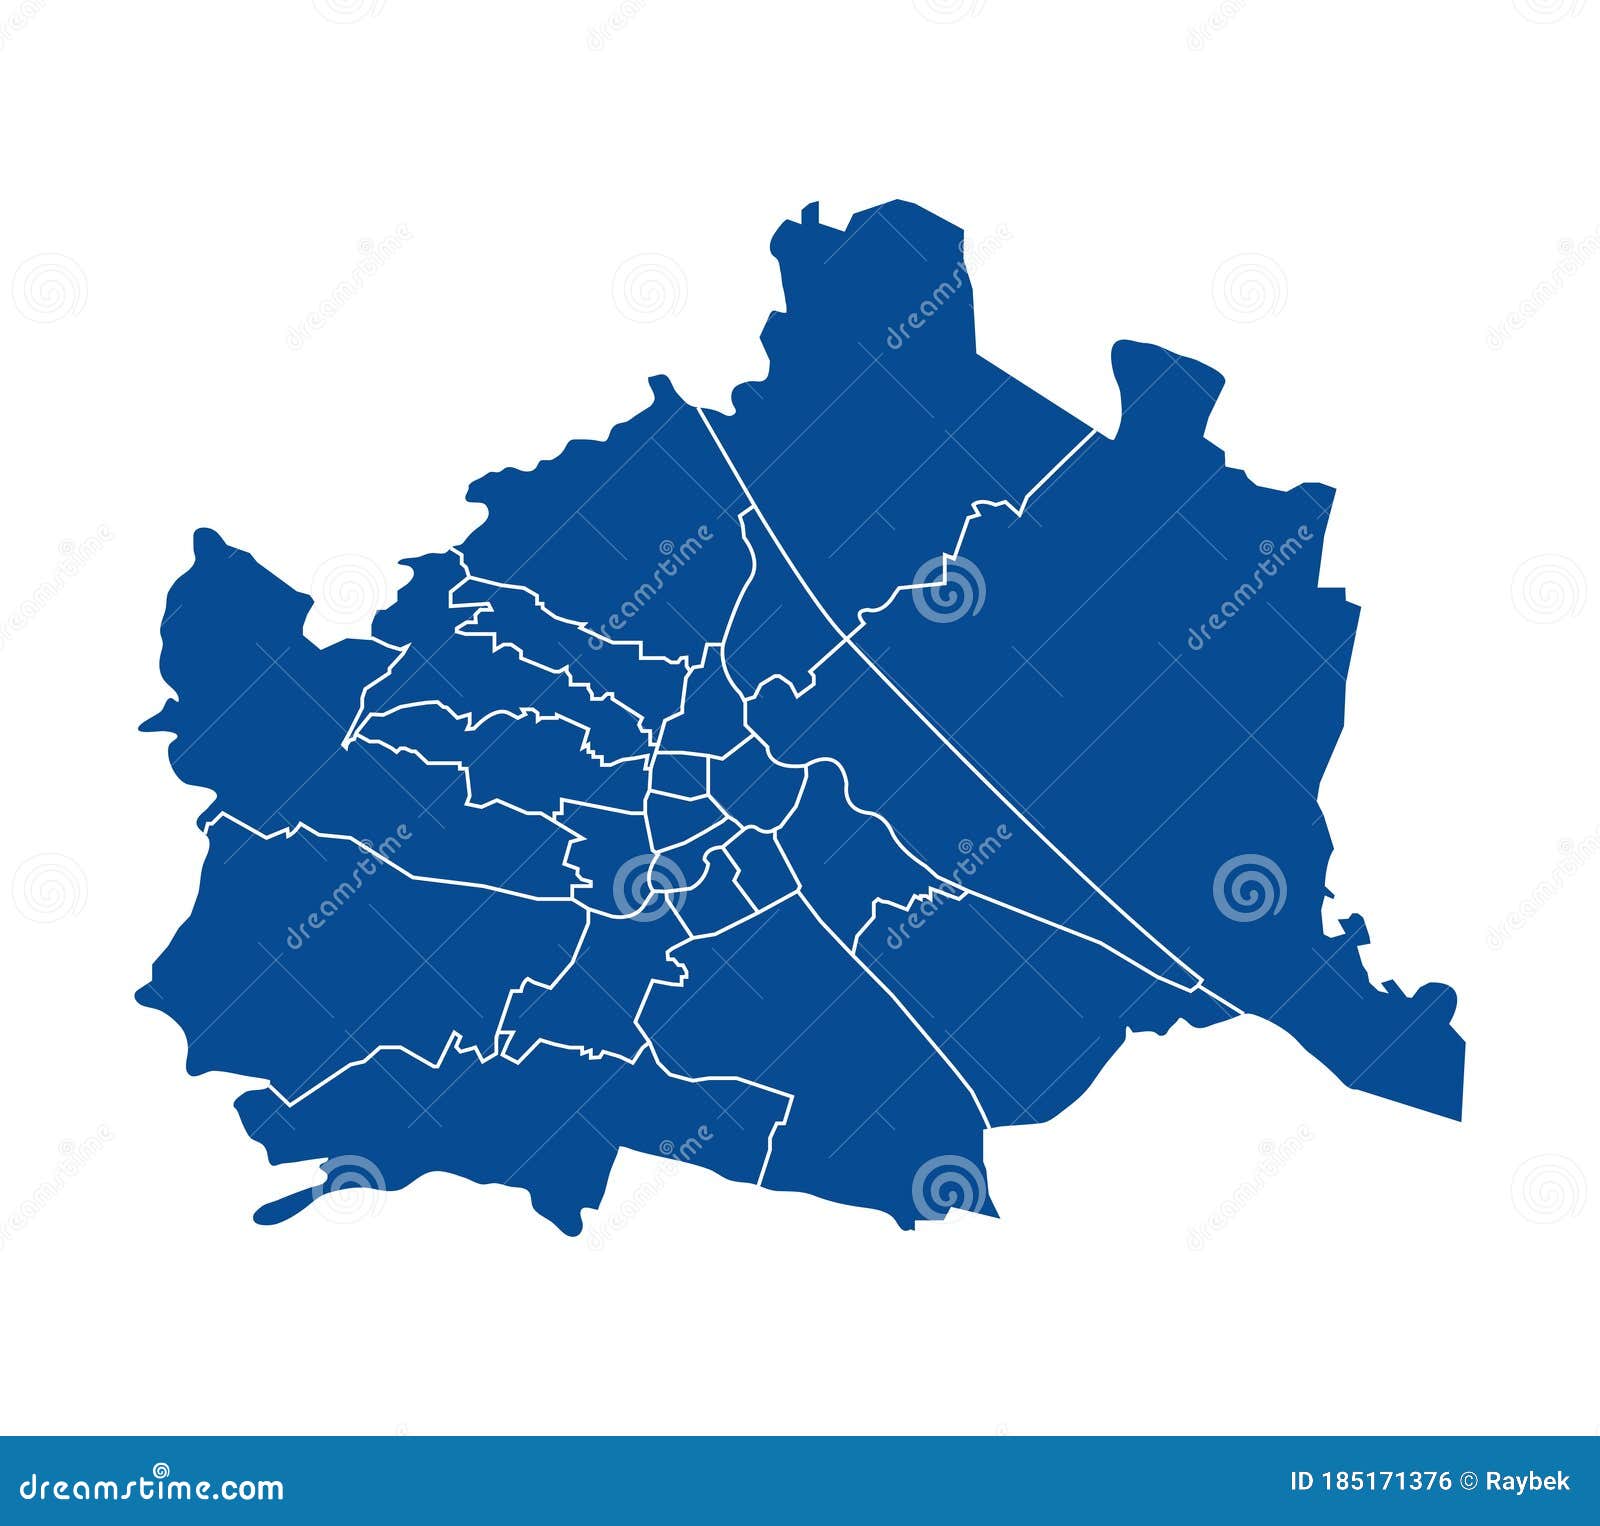 outline blue map of viena